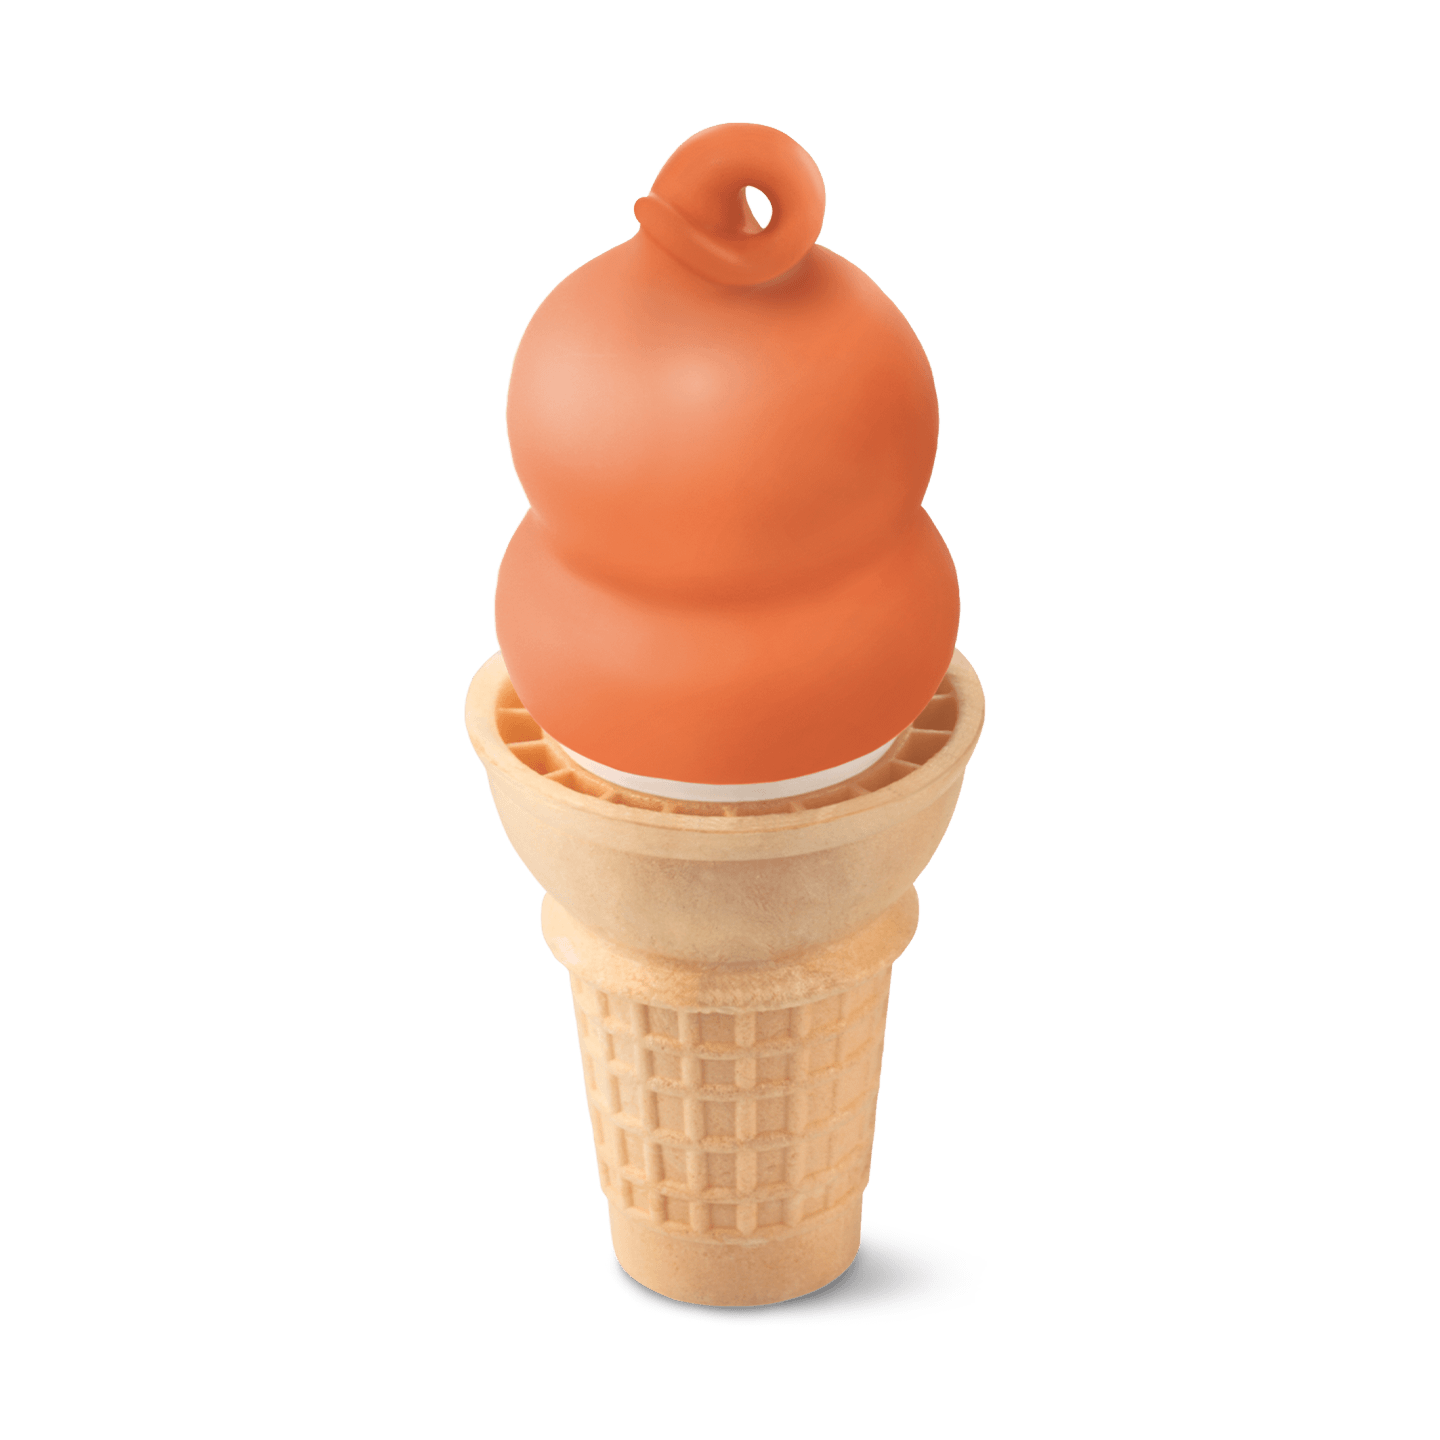 Dairy Queen Medium Dreamsicle Dipped Ice Cream Cone Nutrition Facts